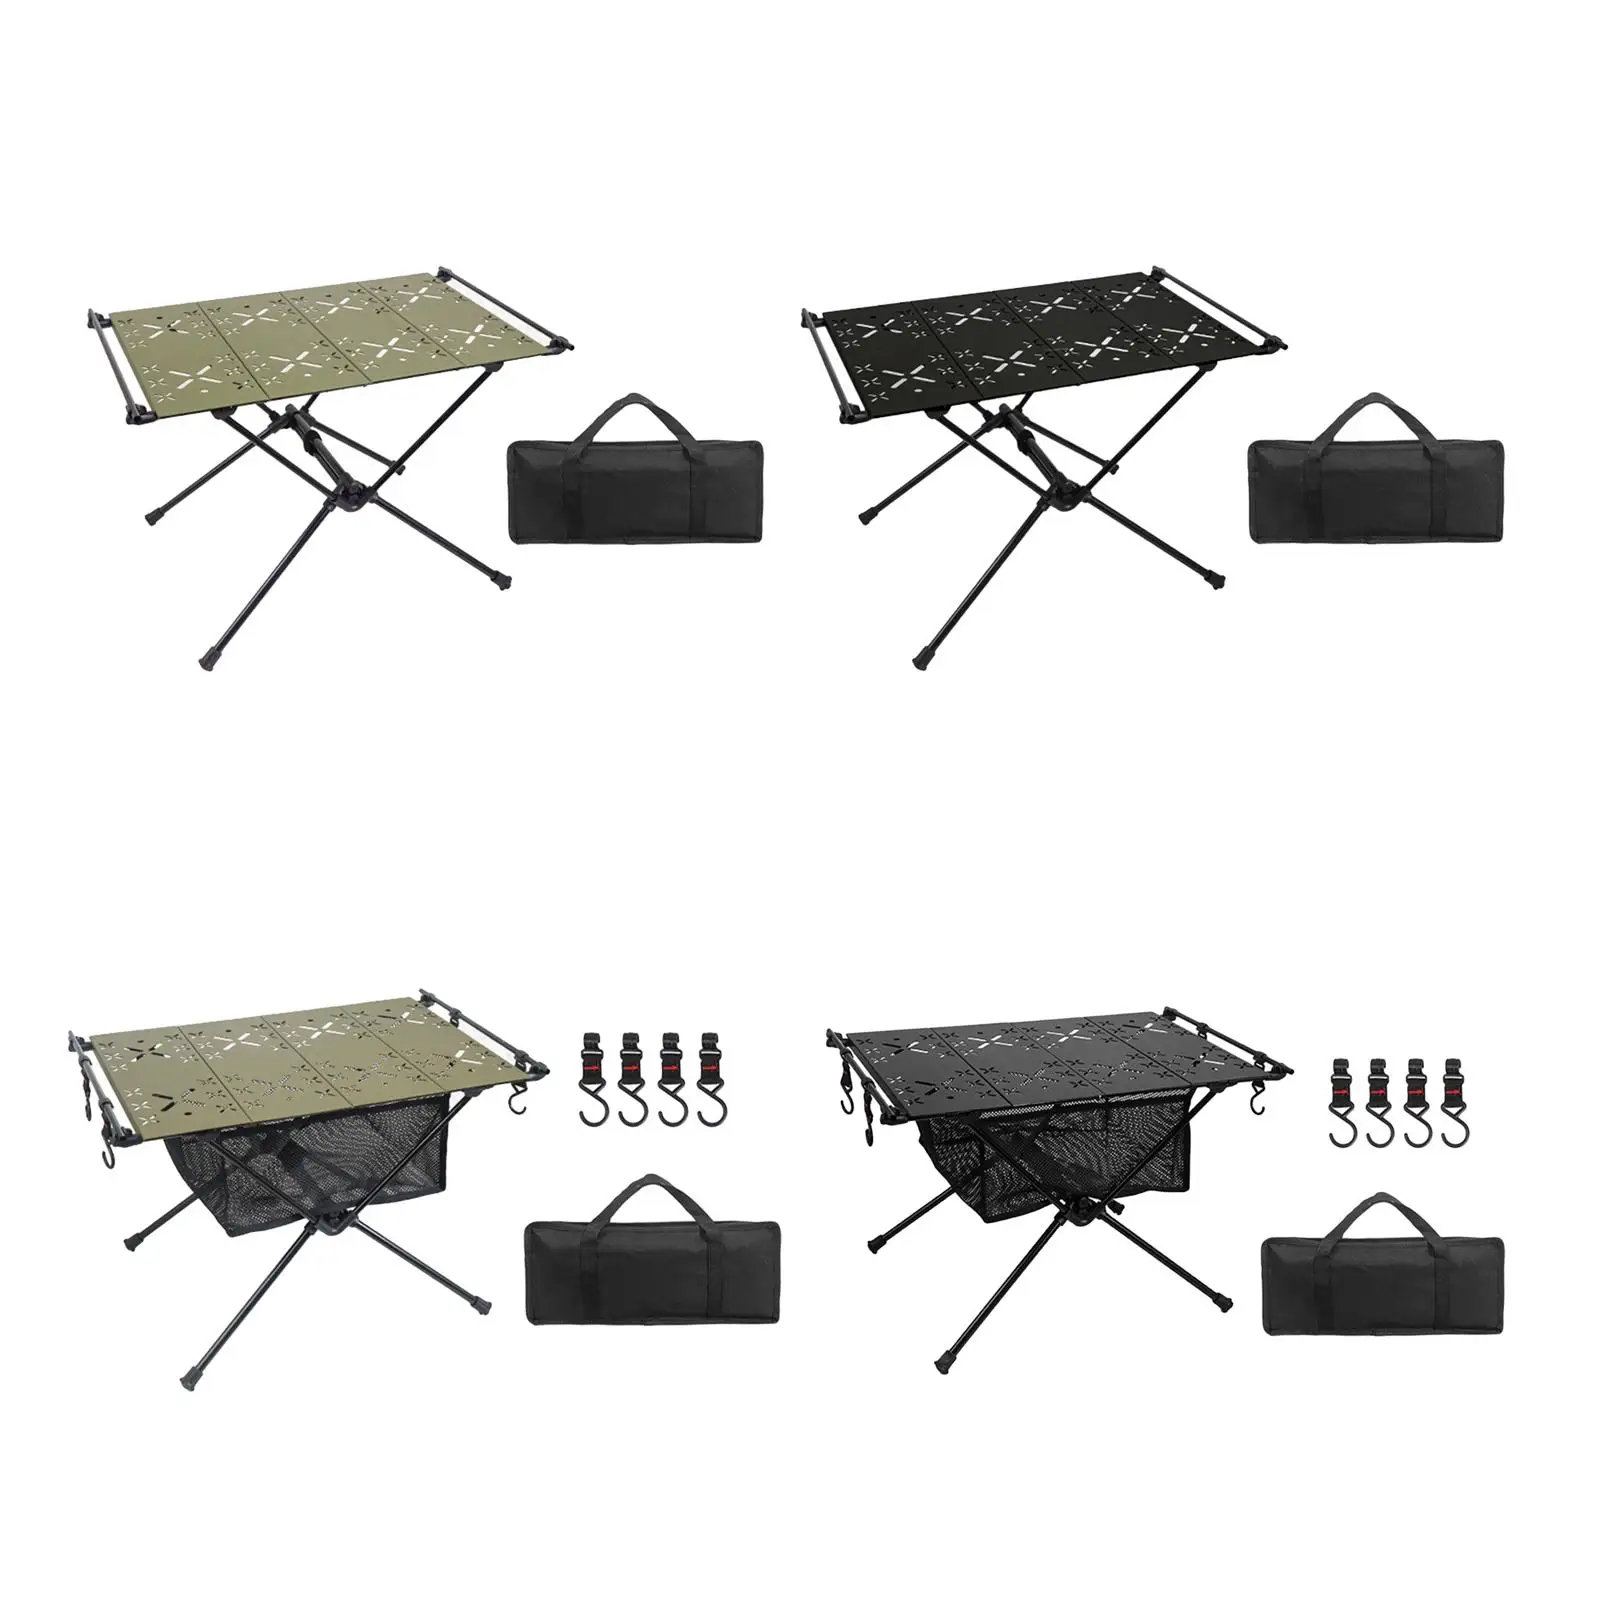 Foldable Camping Table Ultralight Desk Beach Table Outdoor Foldable Table for Patio Fishing Garden Picnic Hiking